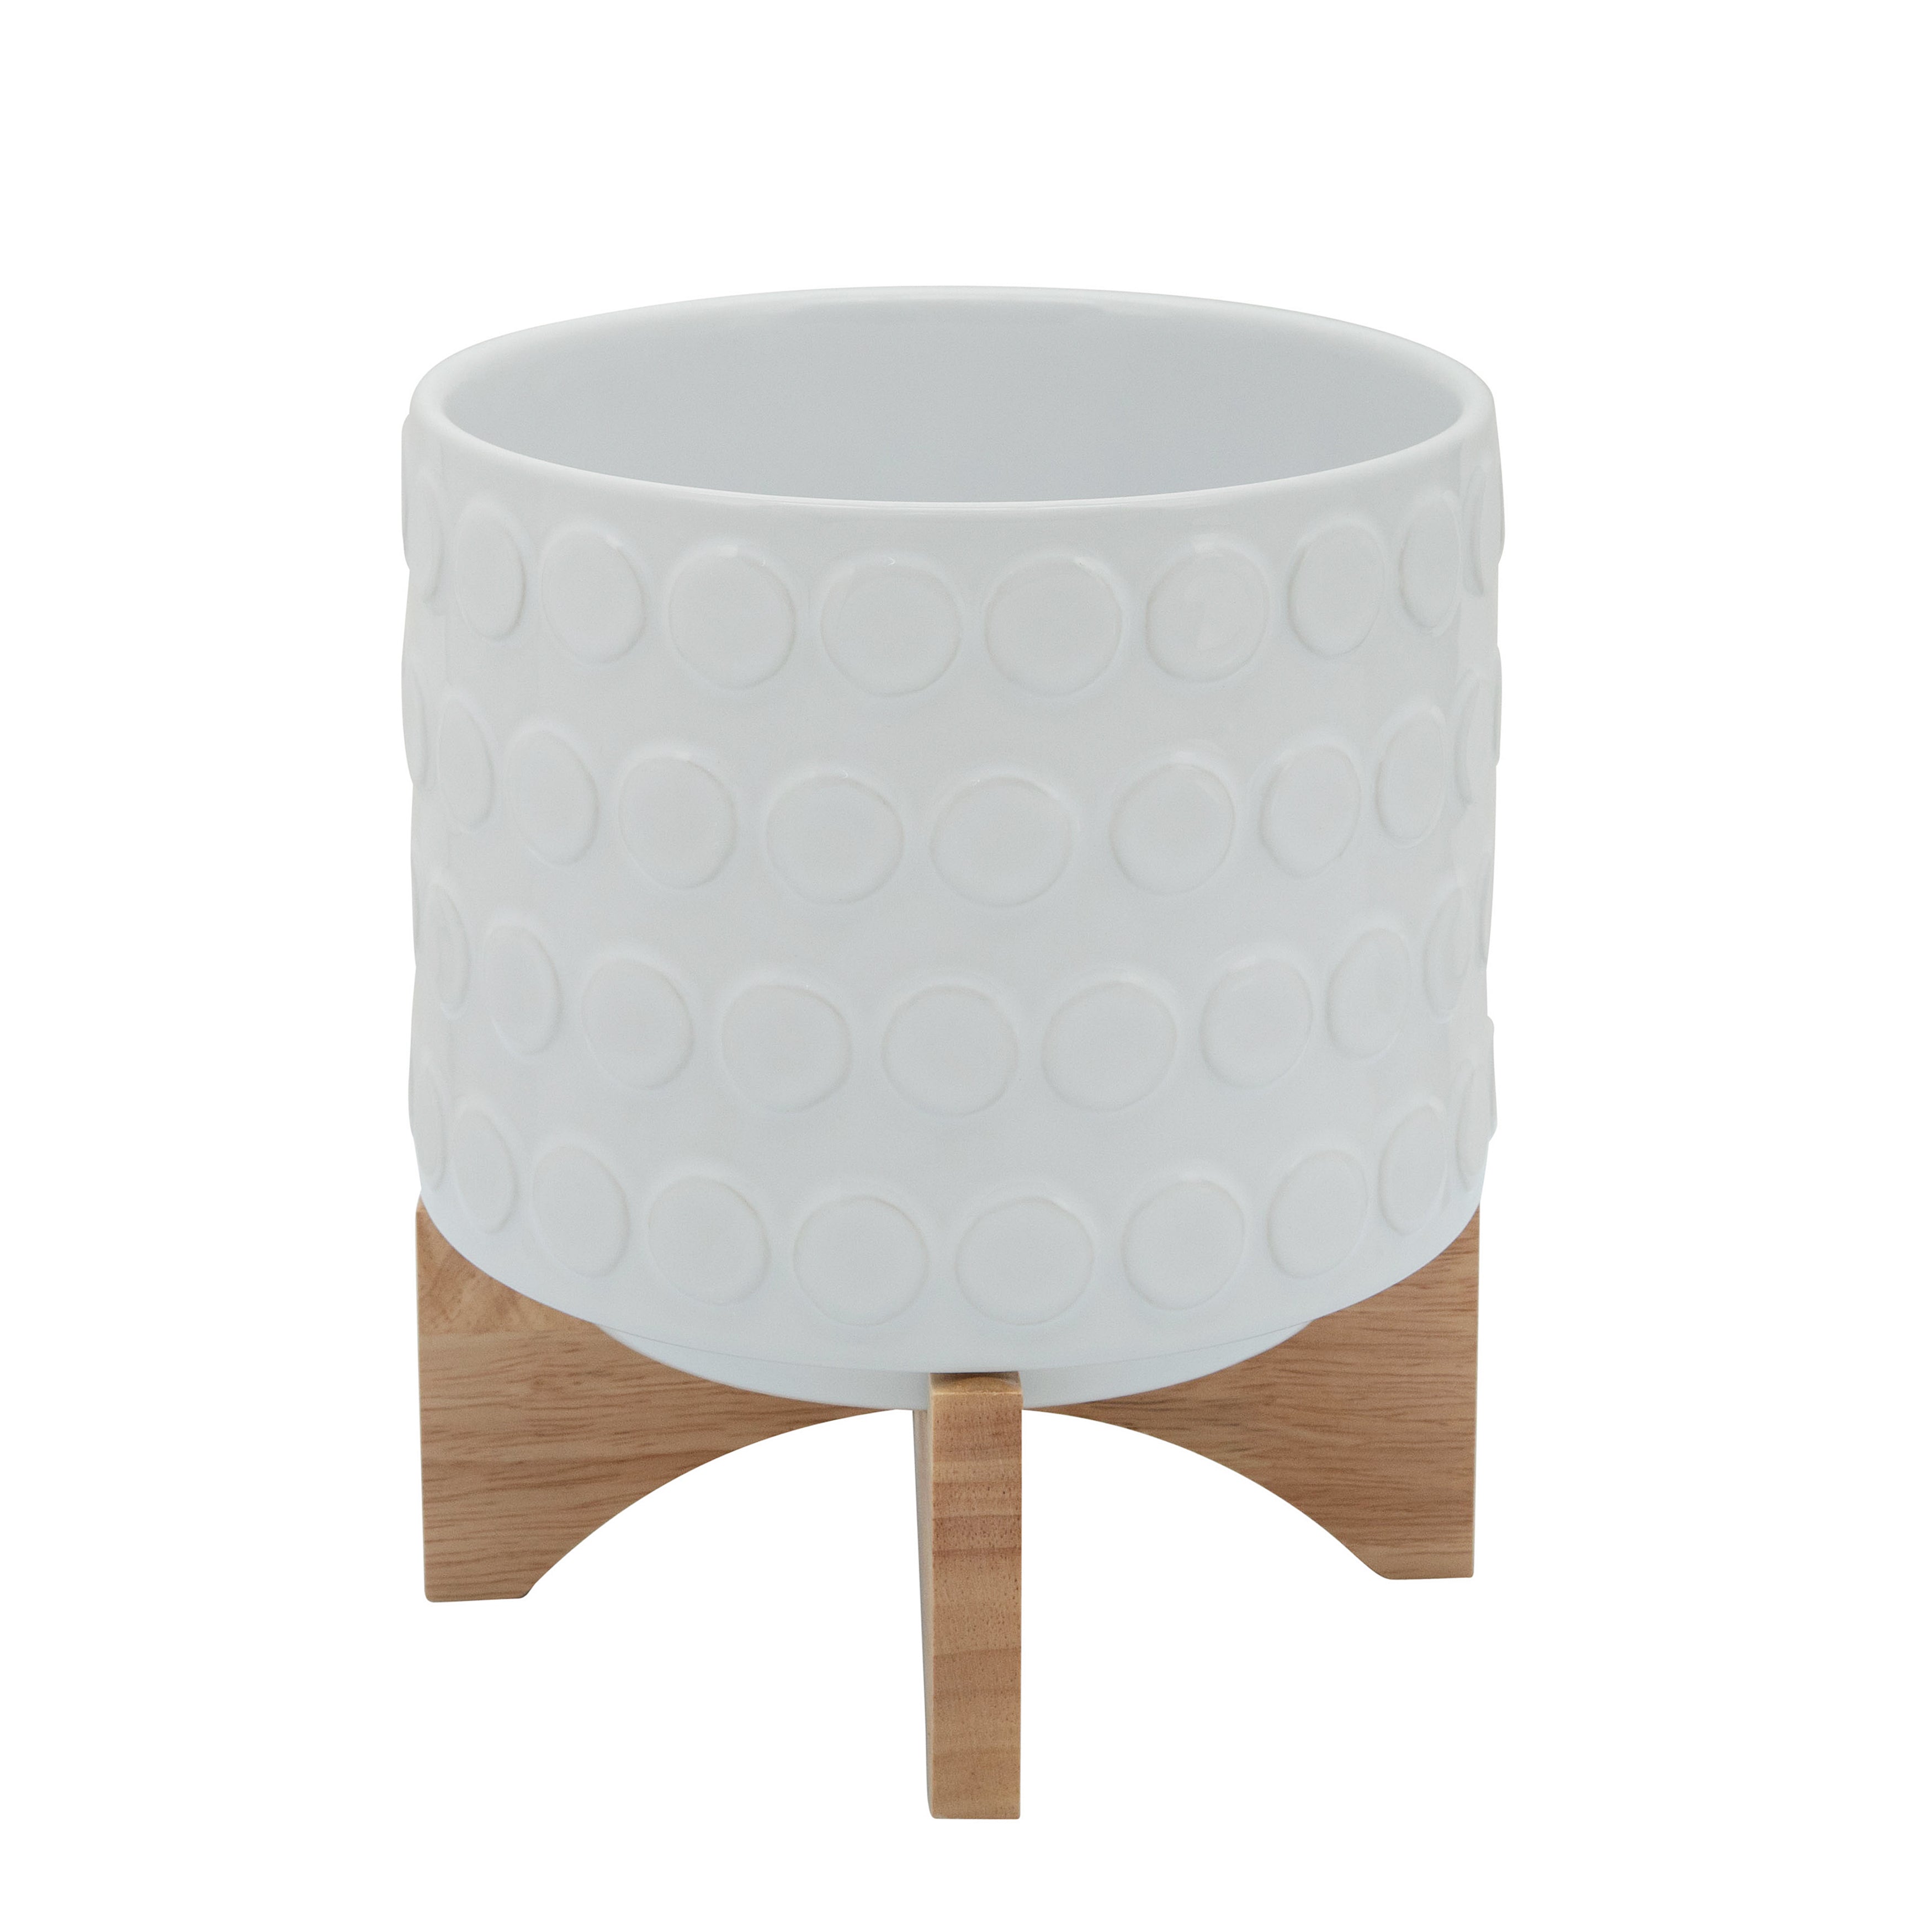 Ceramic 8" Planter On Wooden Stand, White, Planters